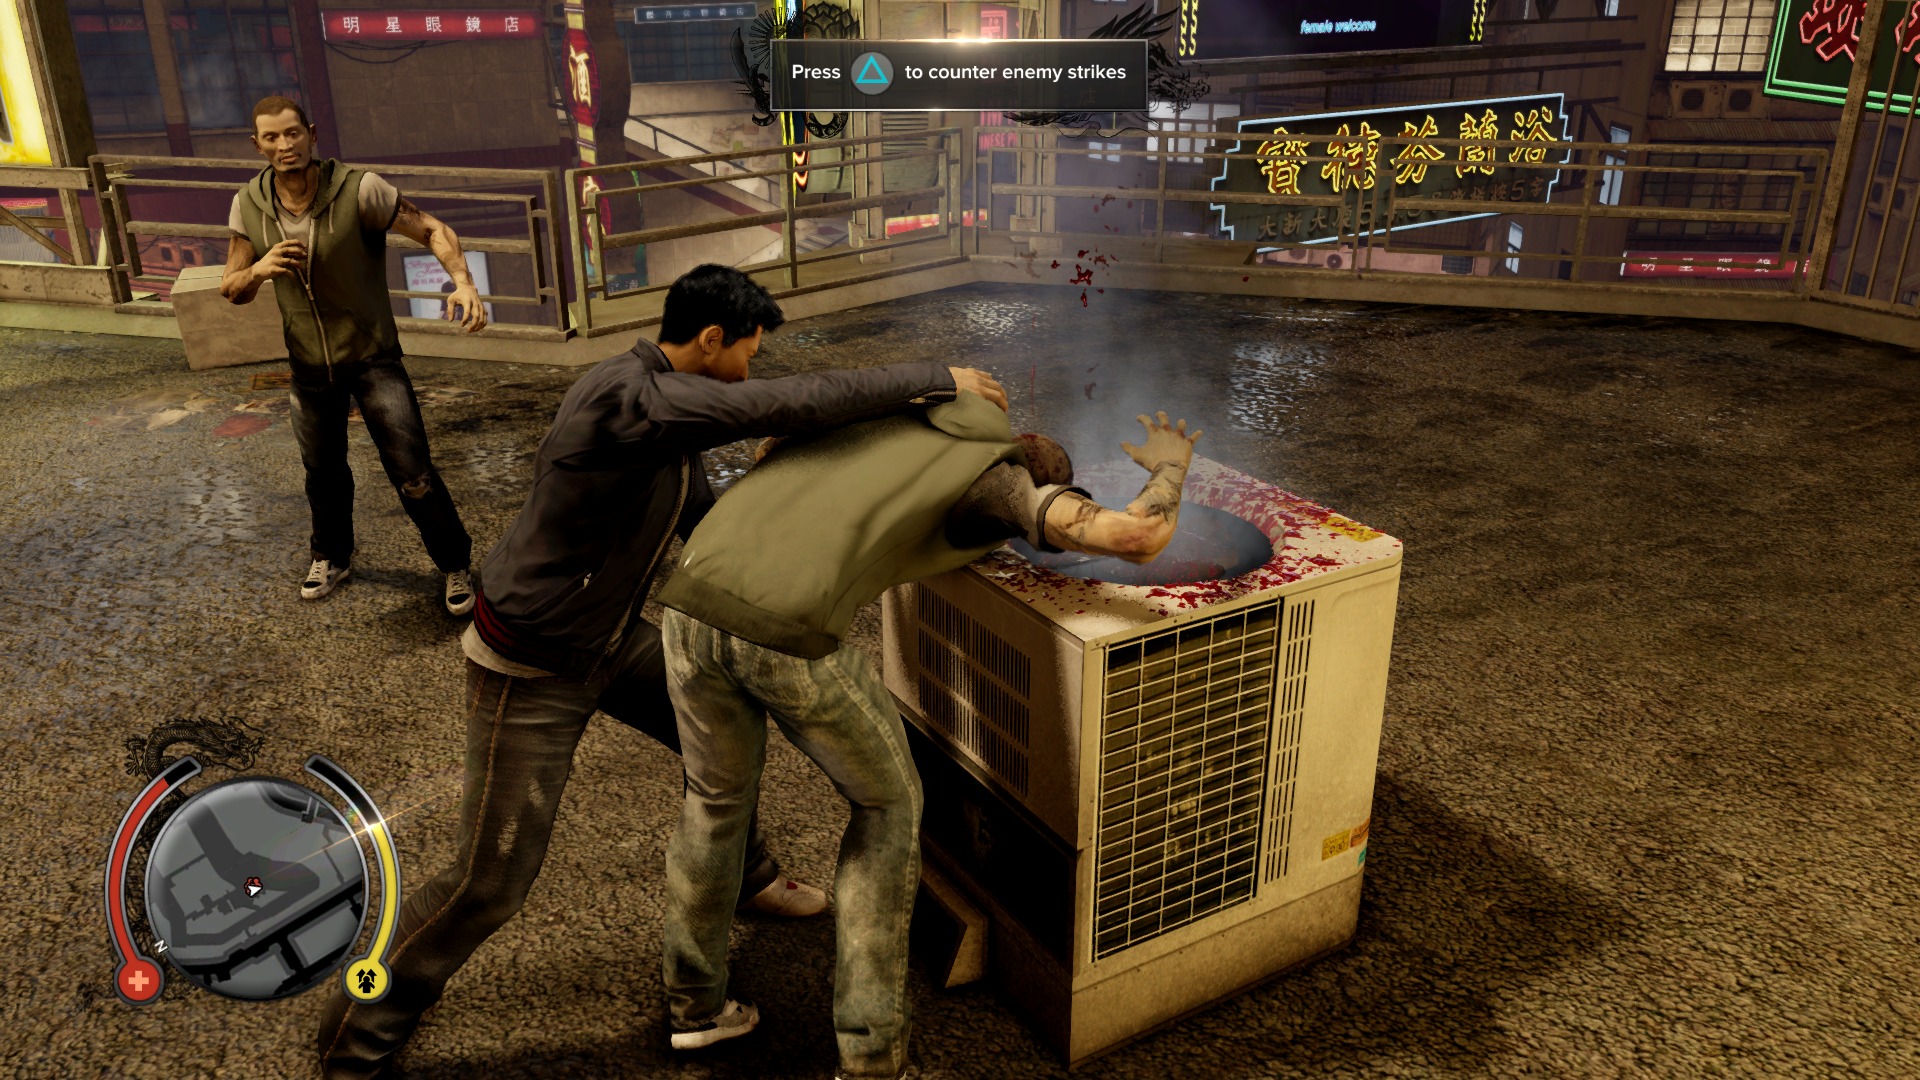 Sleeping Dogs: Definitive Edition (PS4) 